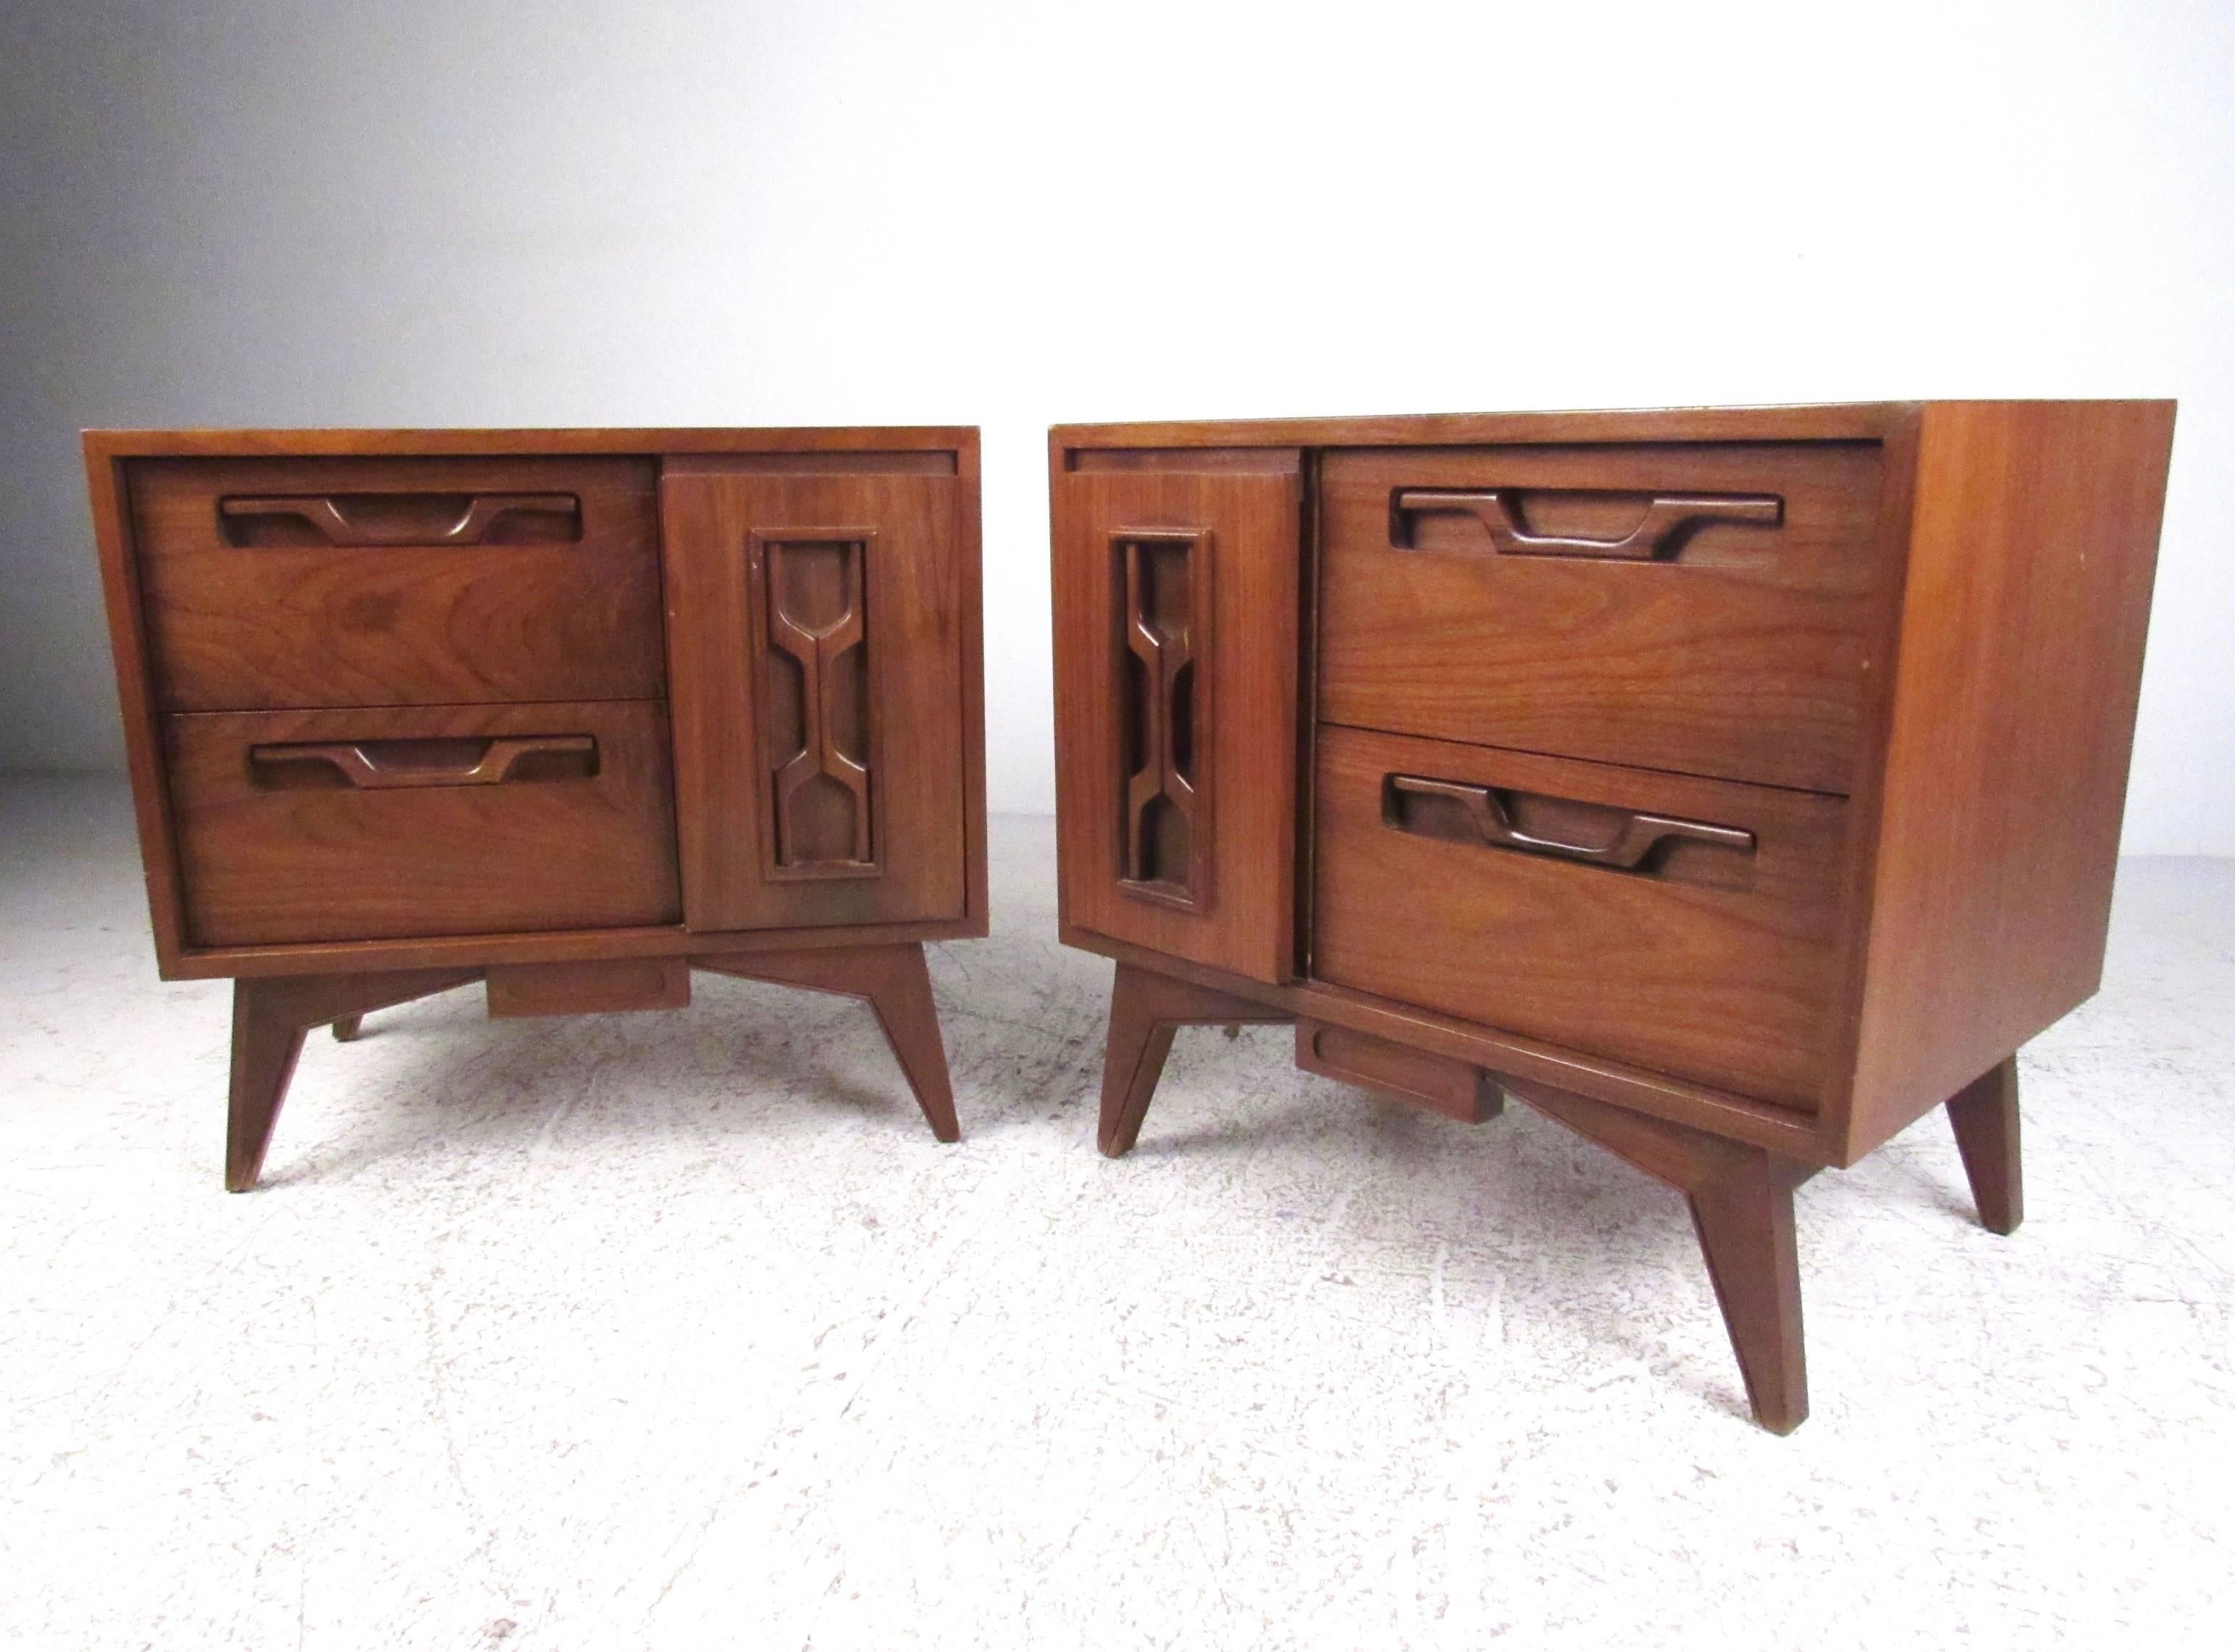 This stunning walnut bedroom set features matching highboy, low dresser, pair of bedside tables, and two dressing mirrors. Sculpted walnut drawer fronts add to the midcentury elegance of this six piece bedroom suite. Please confirm item location (NY